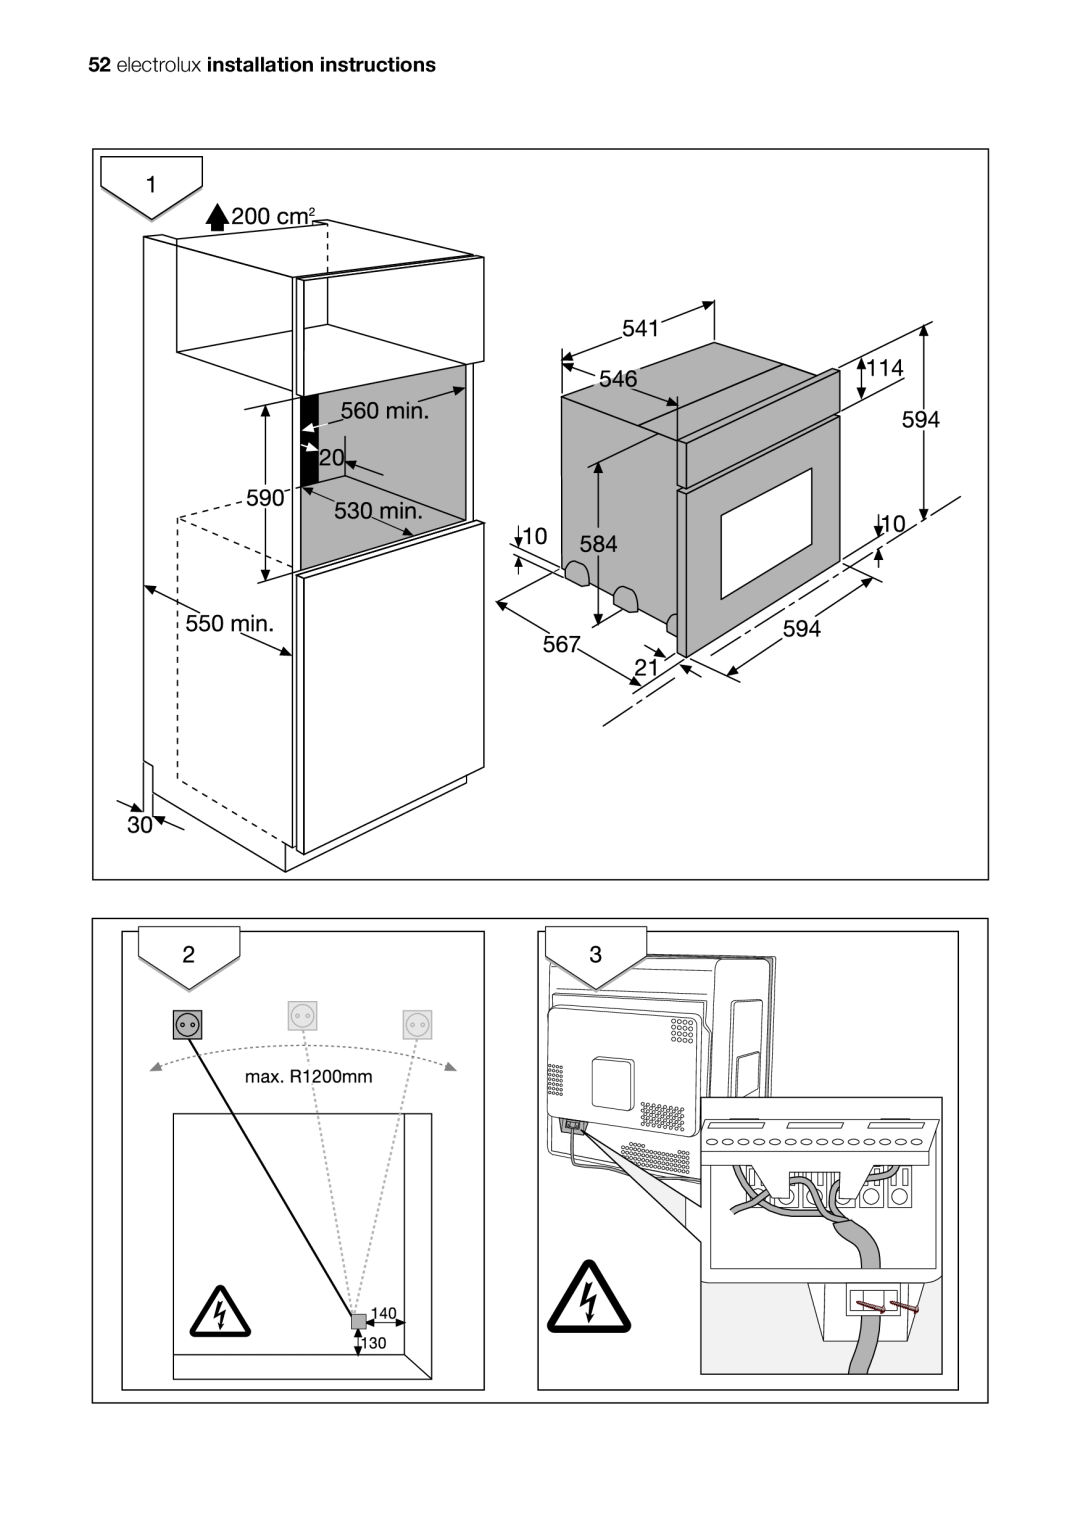 Electrolux EOB63100 user manual electrolux installation instructions 